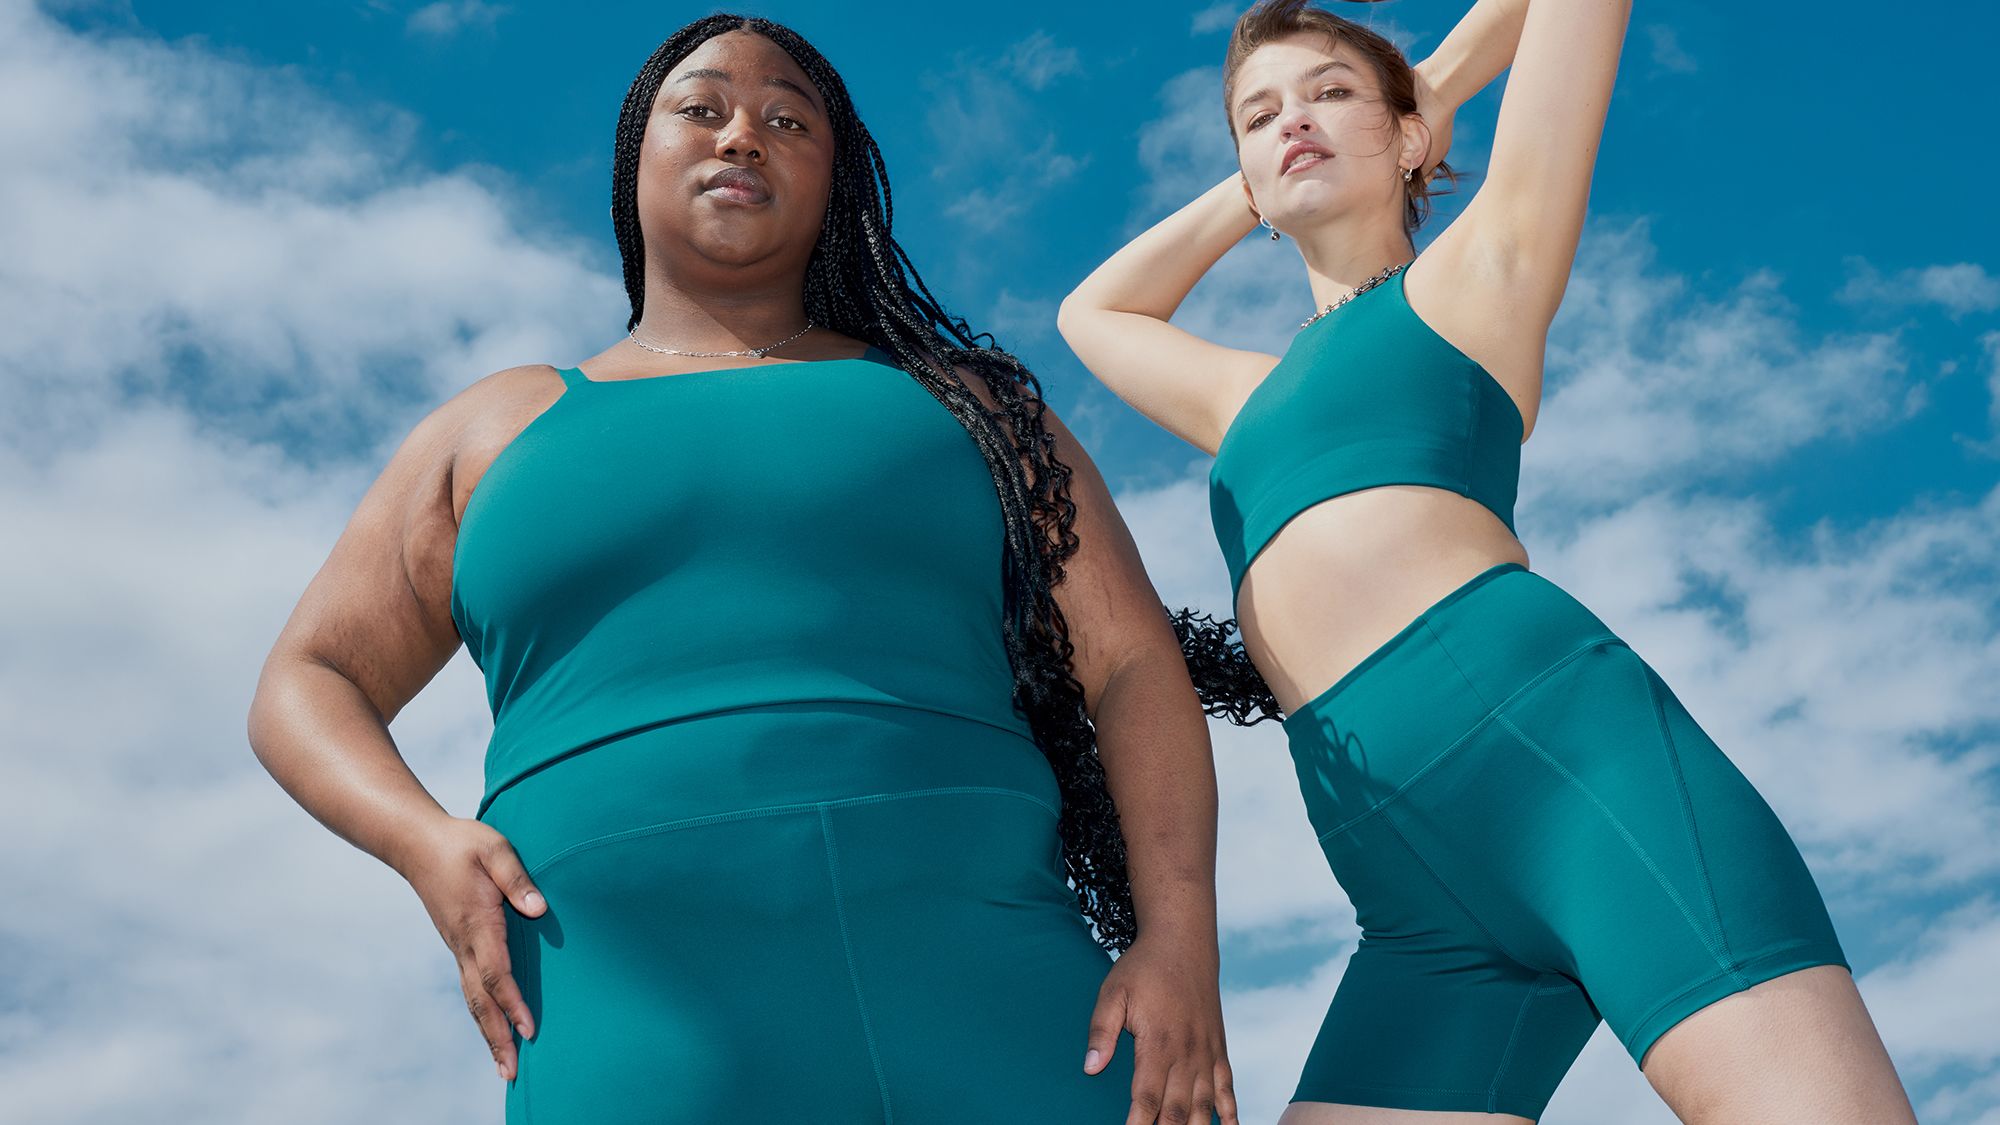 5 Vegan and Sustainable Activewear Brands Perfect for Your Next Workout